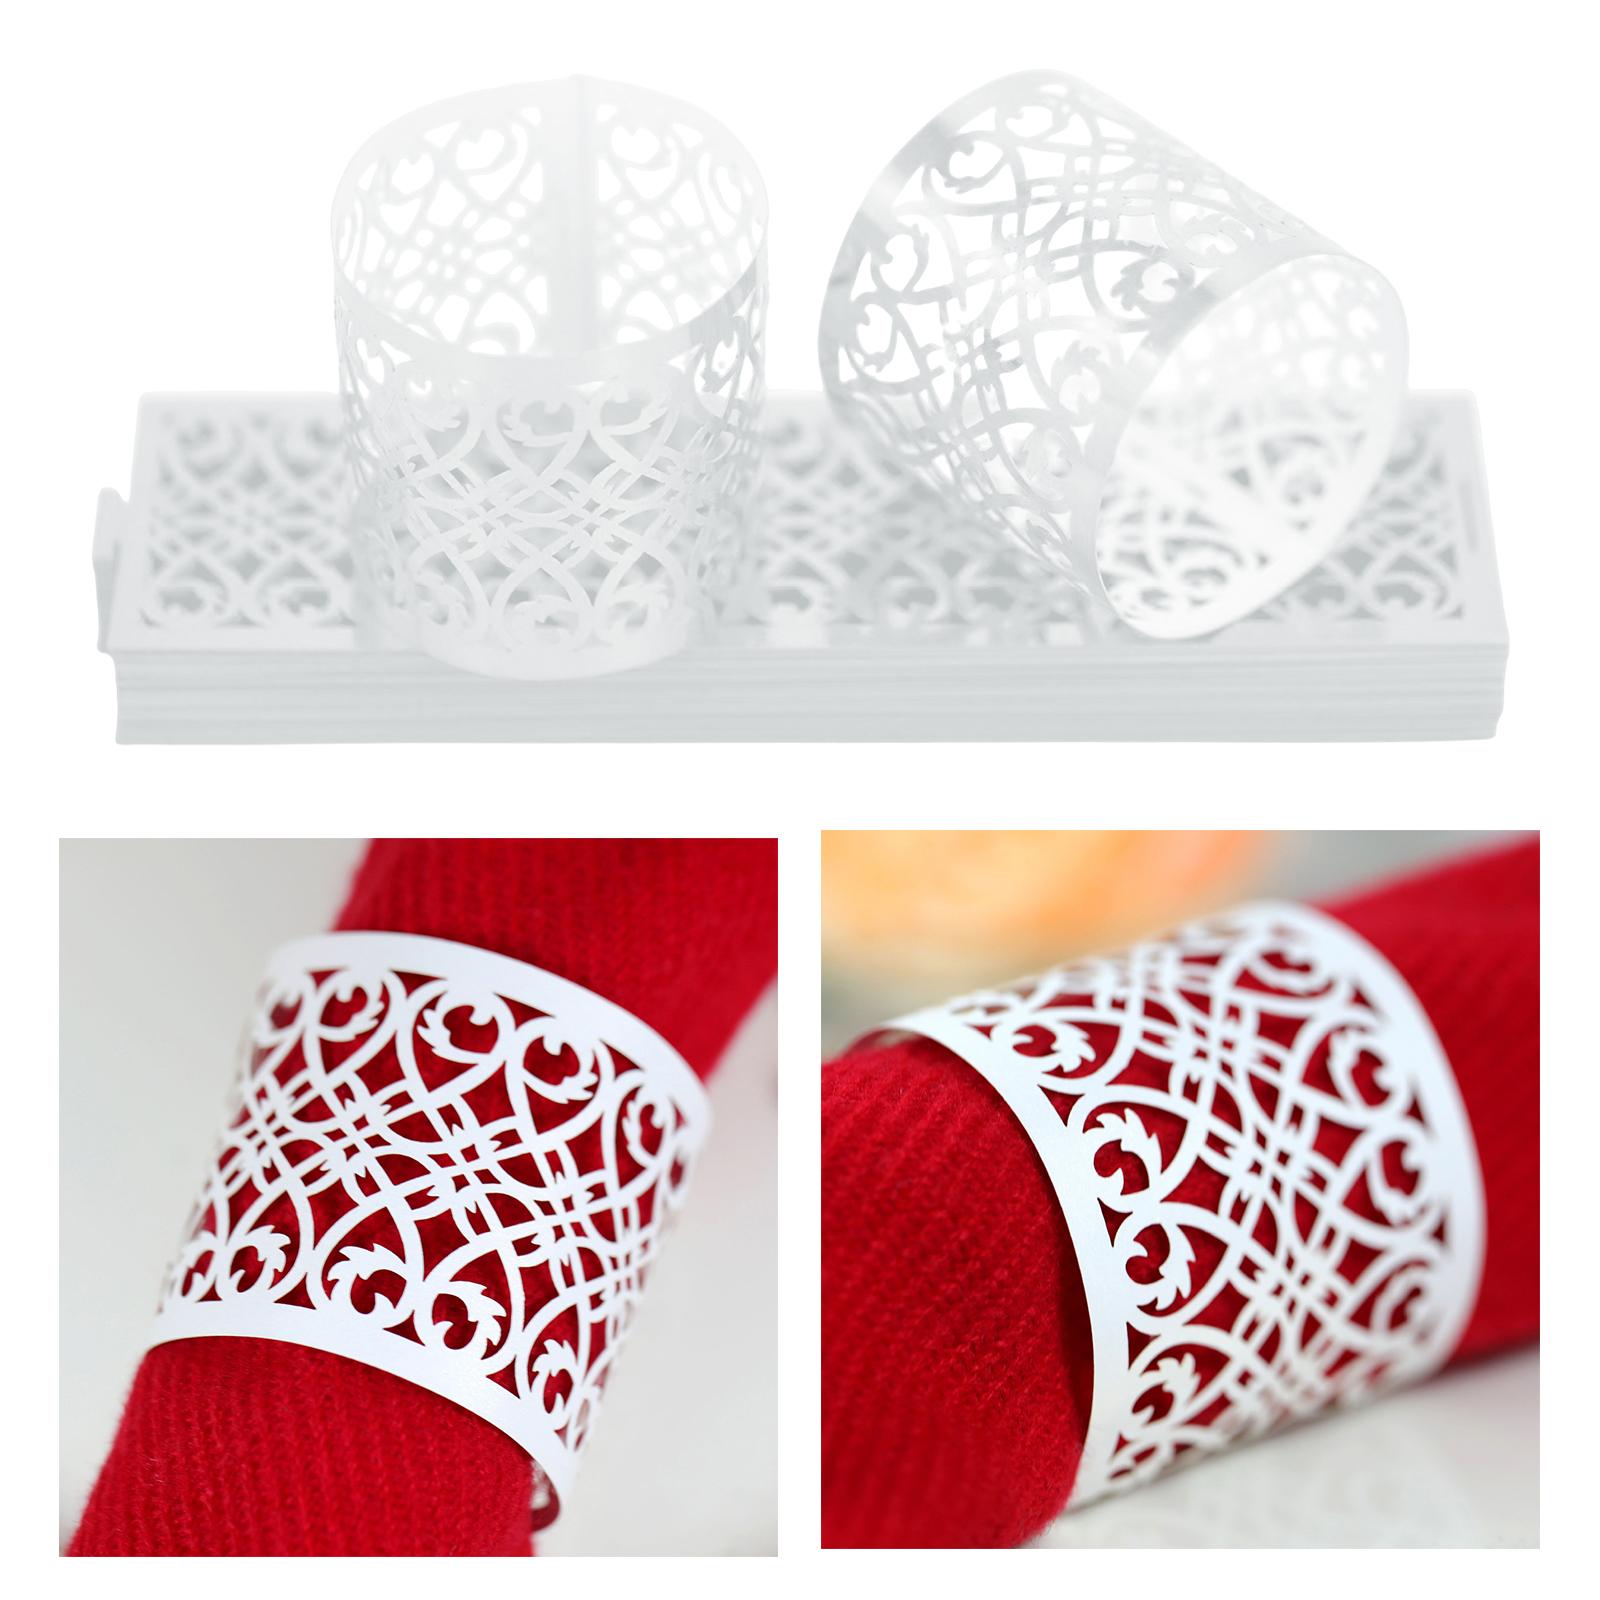 20x Napkin Holder Hollow Paper Napkin Ring for Holiday Ornament Party Favor White